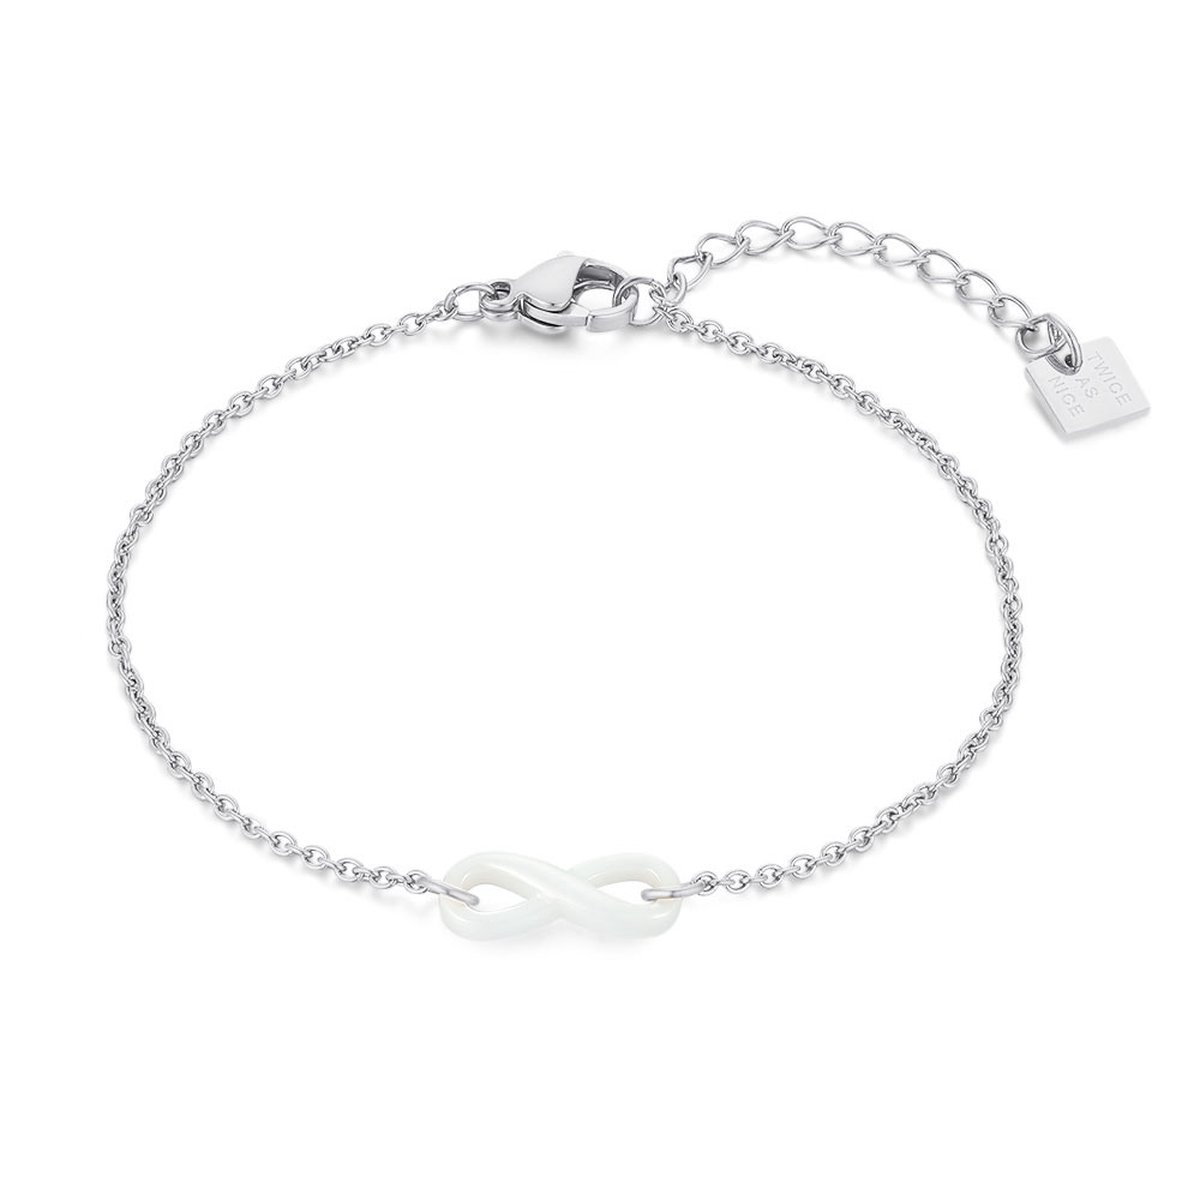 Twice As Nice Armband in edelstaal, witte infinity 16 cm+3 cm